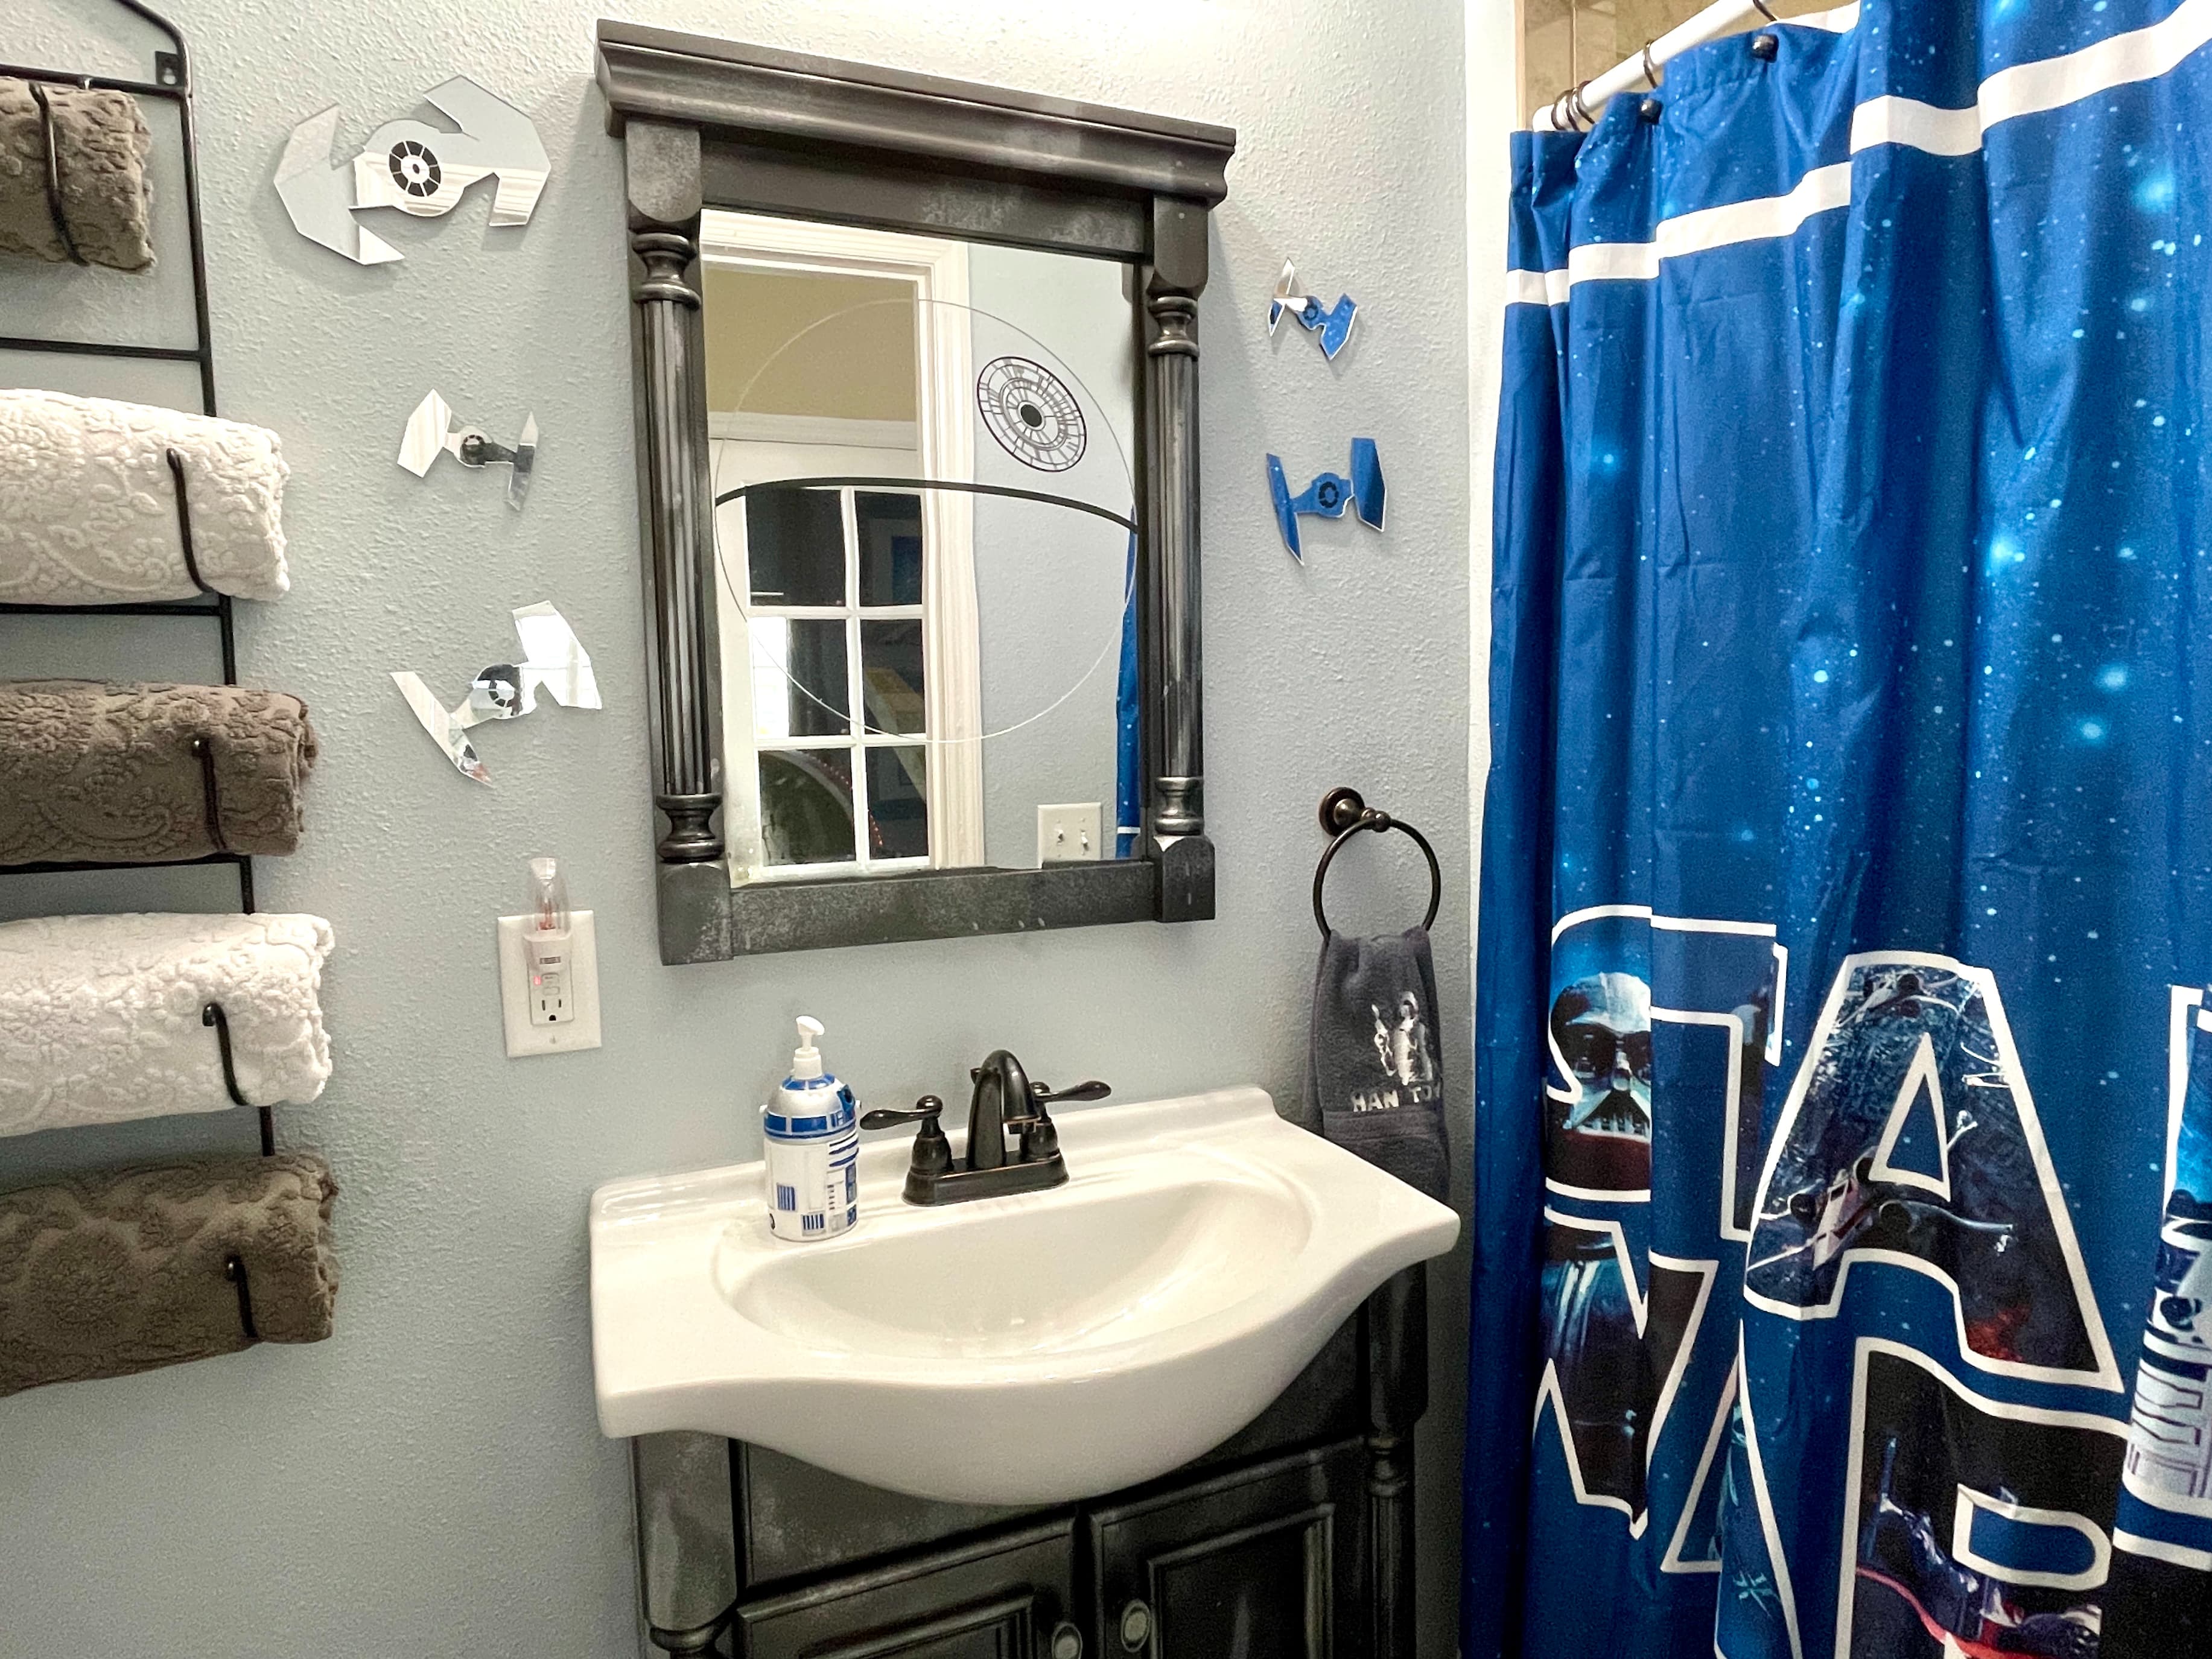 Detached STAR WARS bathroom is just two steps into the hall from the themed bedrooms.